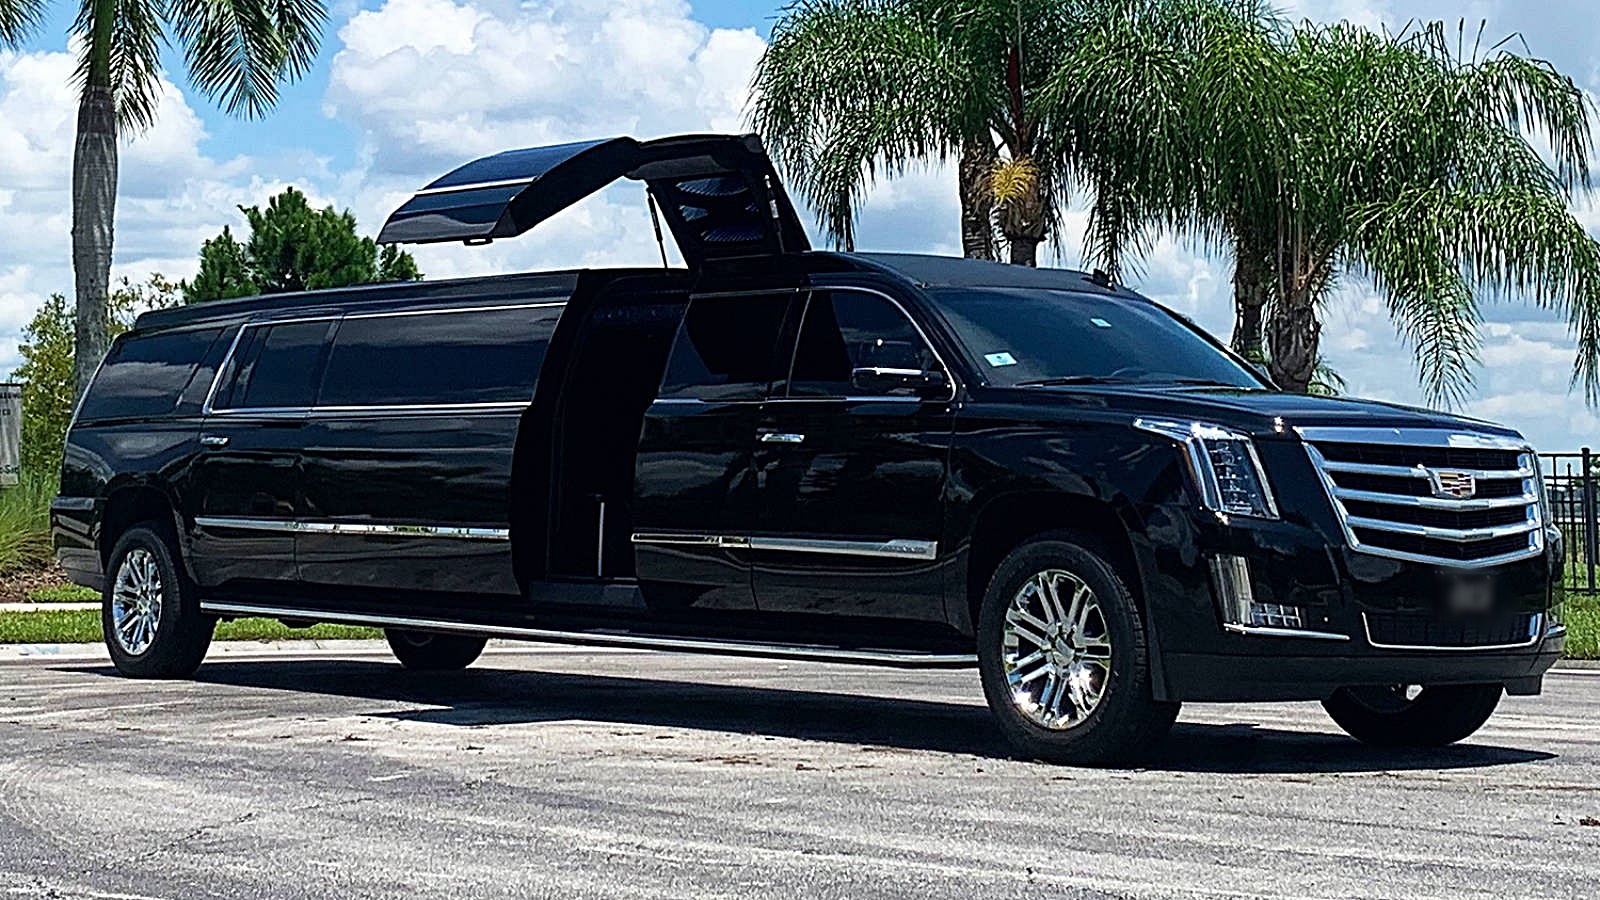 Tompkins County Limo Service: Your Premier Transportation Solution